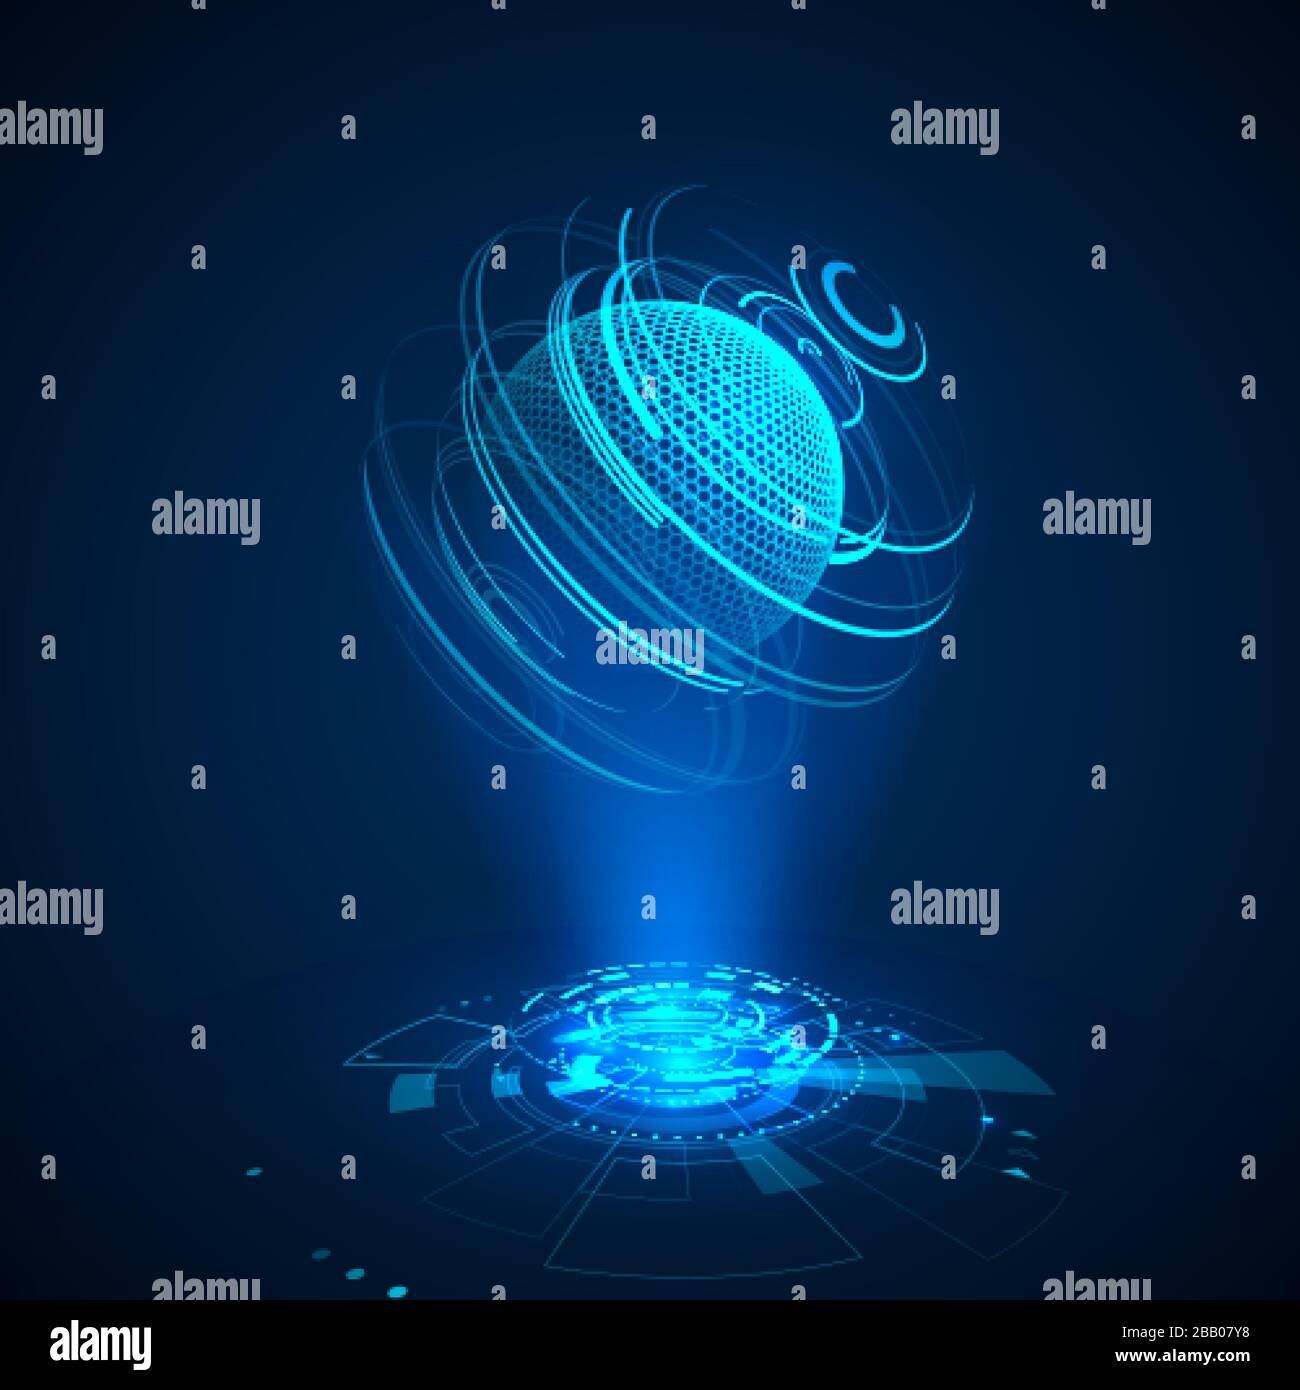 Futuristic 3d radar. Hologram of abstract planet with speed lines. Sci-fi blue background. vr interface illustration or hud element. Vector Stock Vector